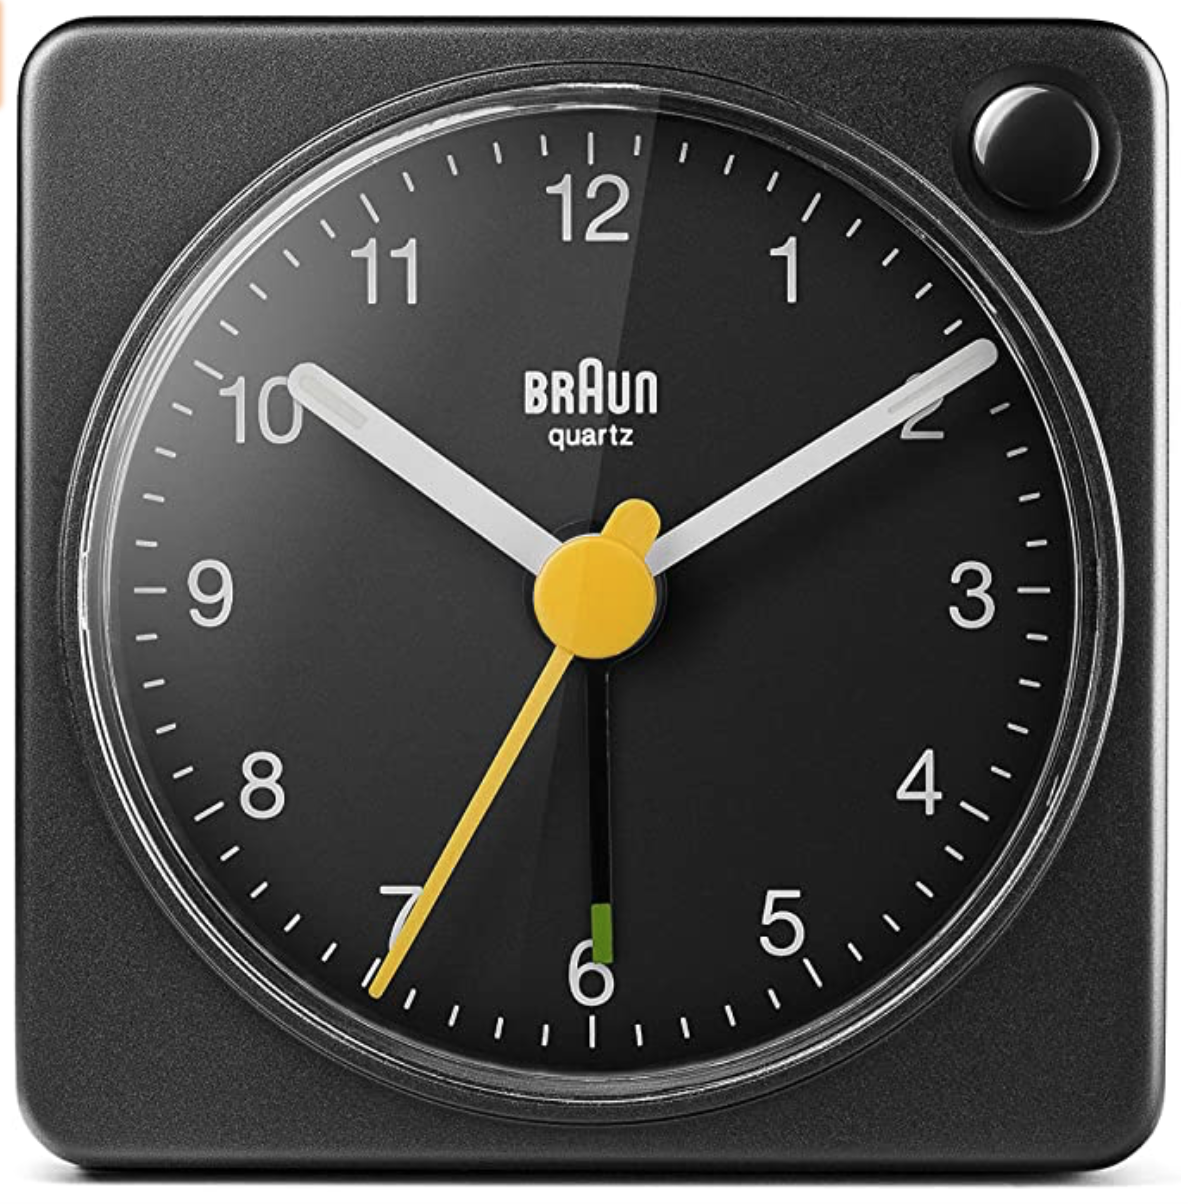 Braun Classic Travel Analogue Clock with Snooze and Light, Compact Size, Quiet Quartz Movement, Crescendo Beep Alarm in Black, Model BC02XB, One